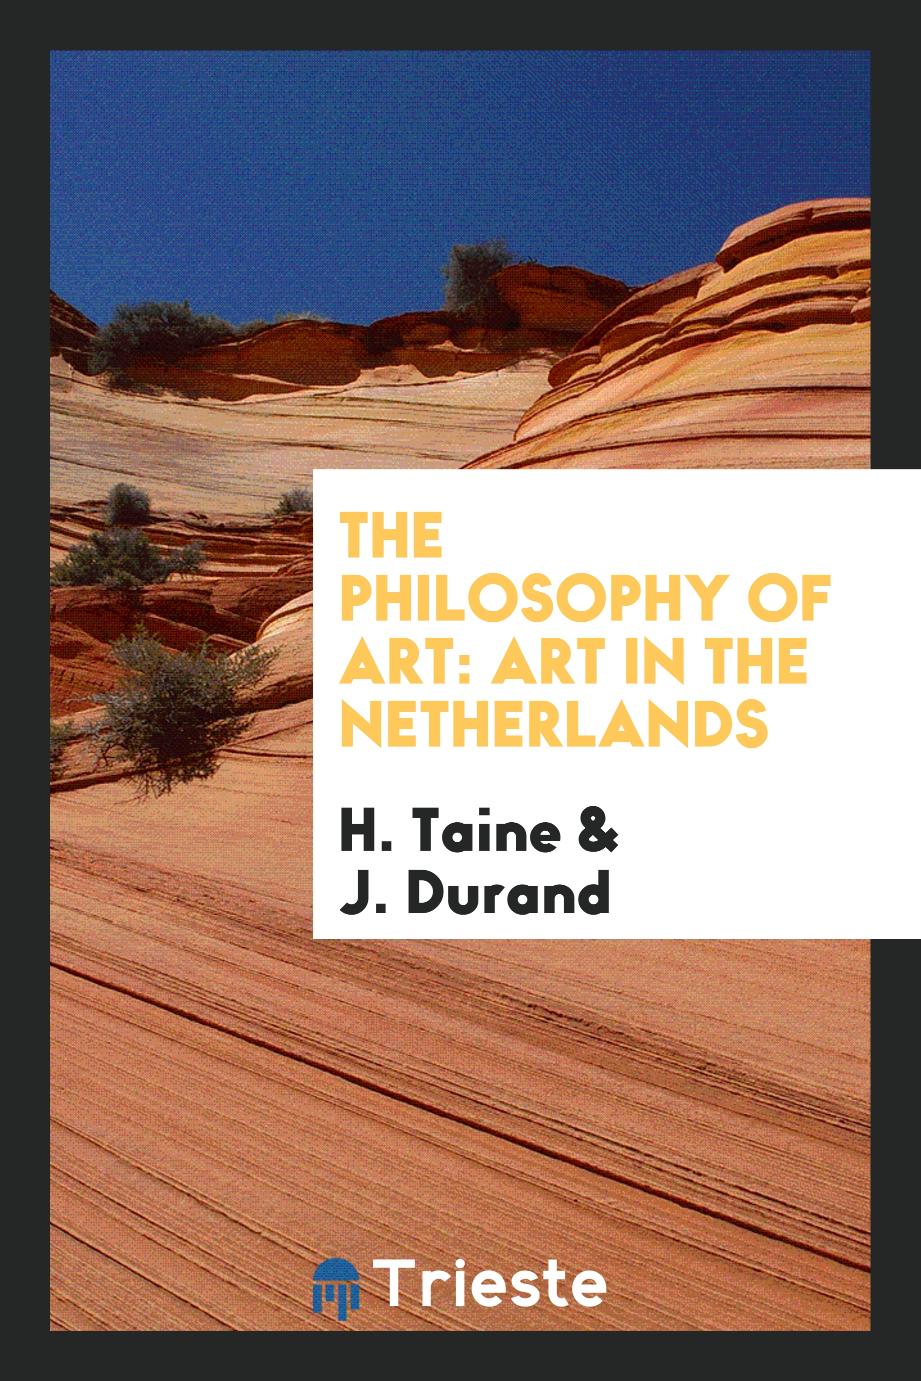 The Philosophy of Art: Art in the Netherlands